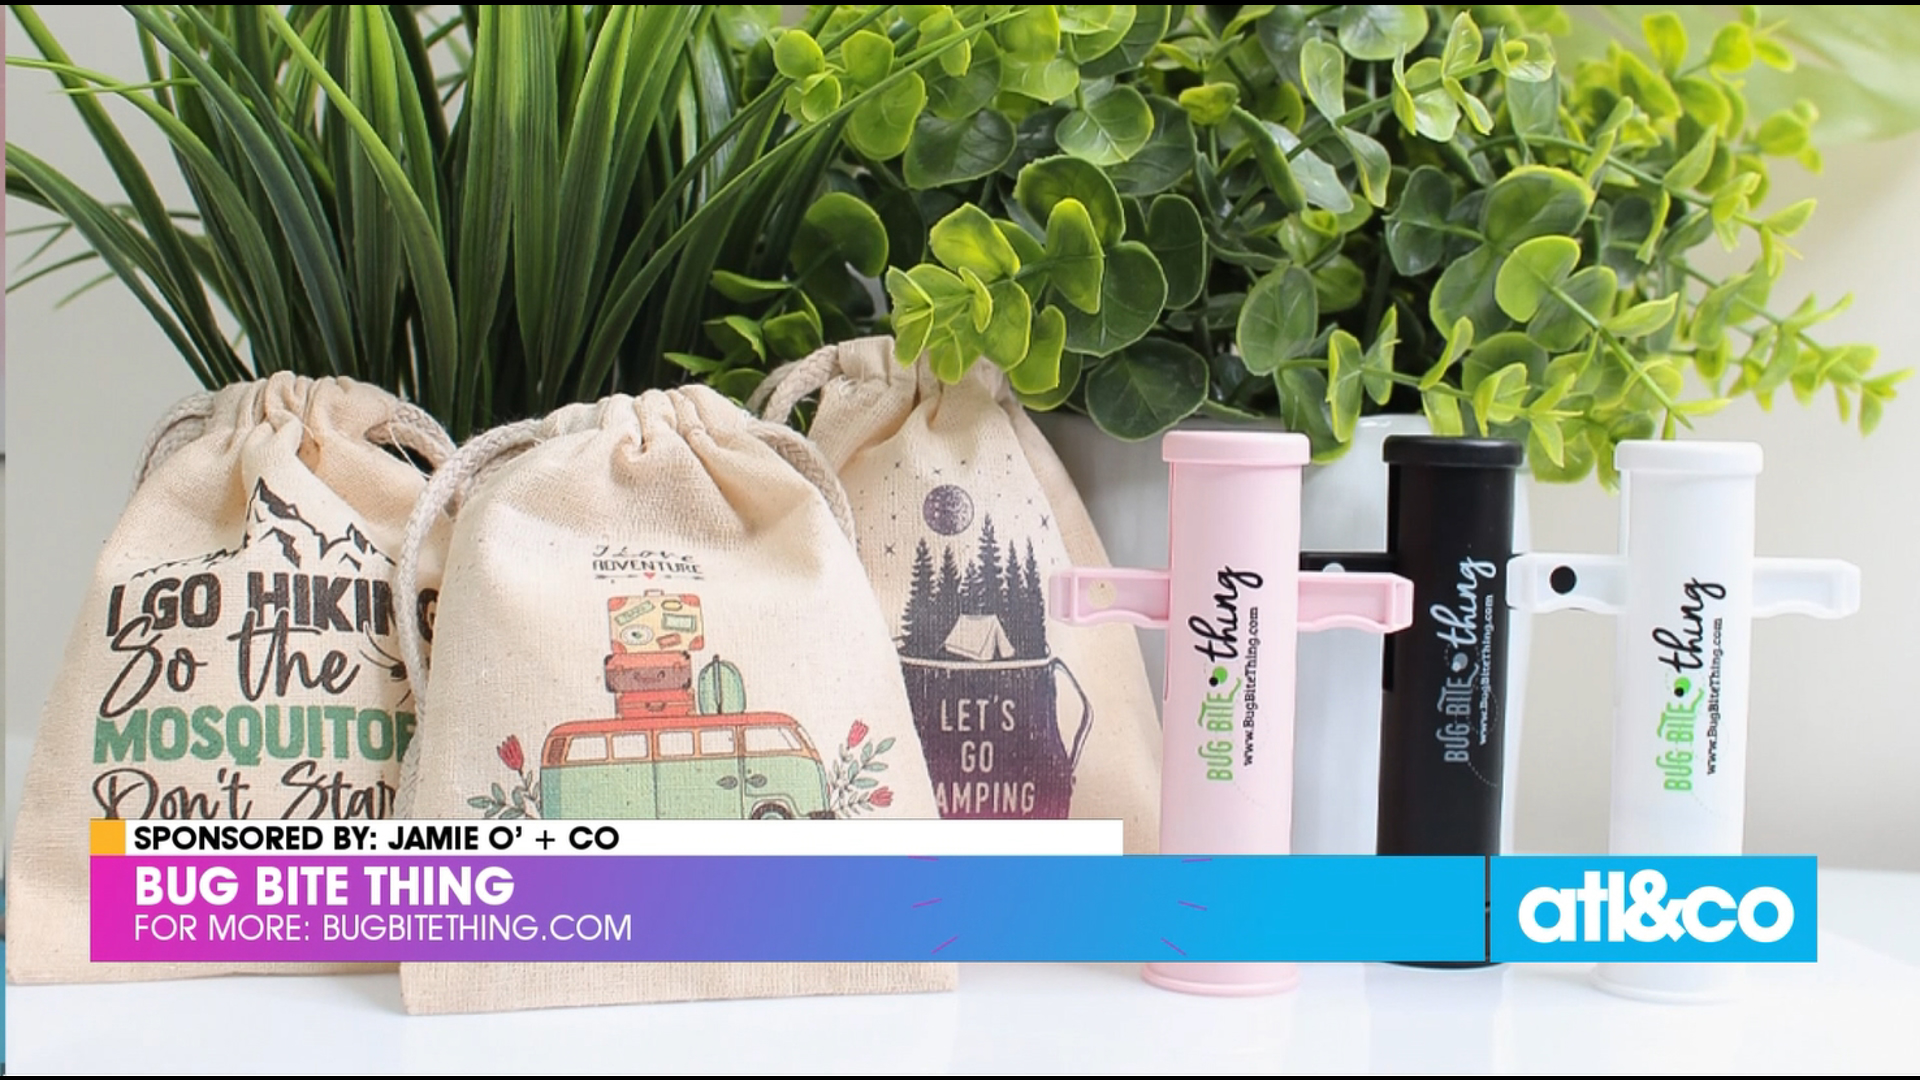 Lifestyle expert Jamie O'Donnell shares top summer products for the whole family.